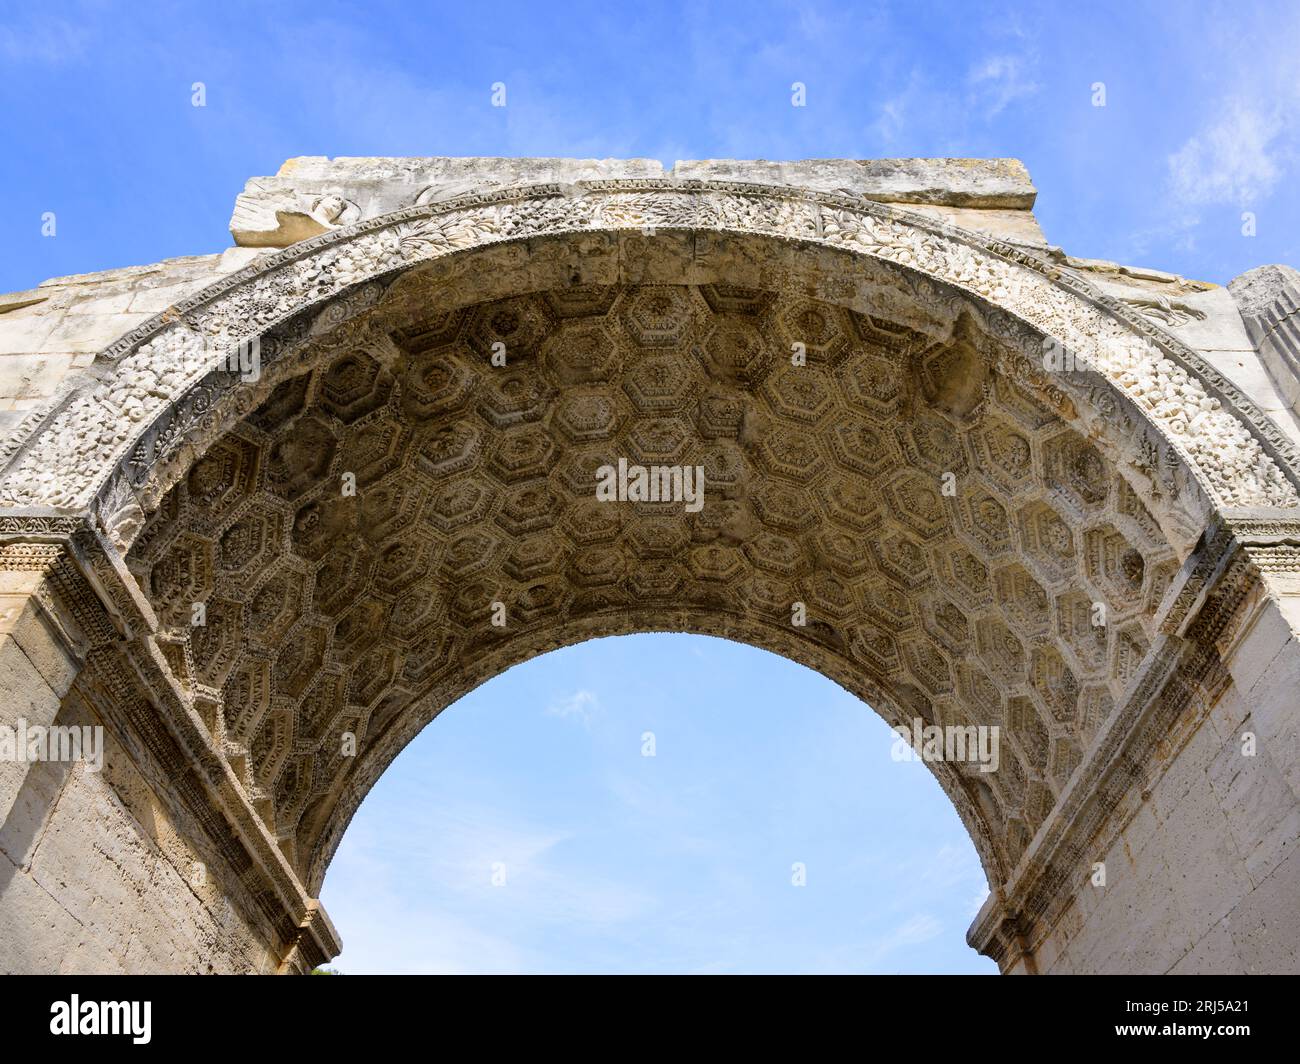 The Triumphal Arch dates from 20AD and was built by the Romans, sunny day in springtime Stock Photo